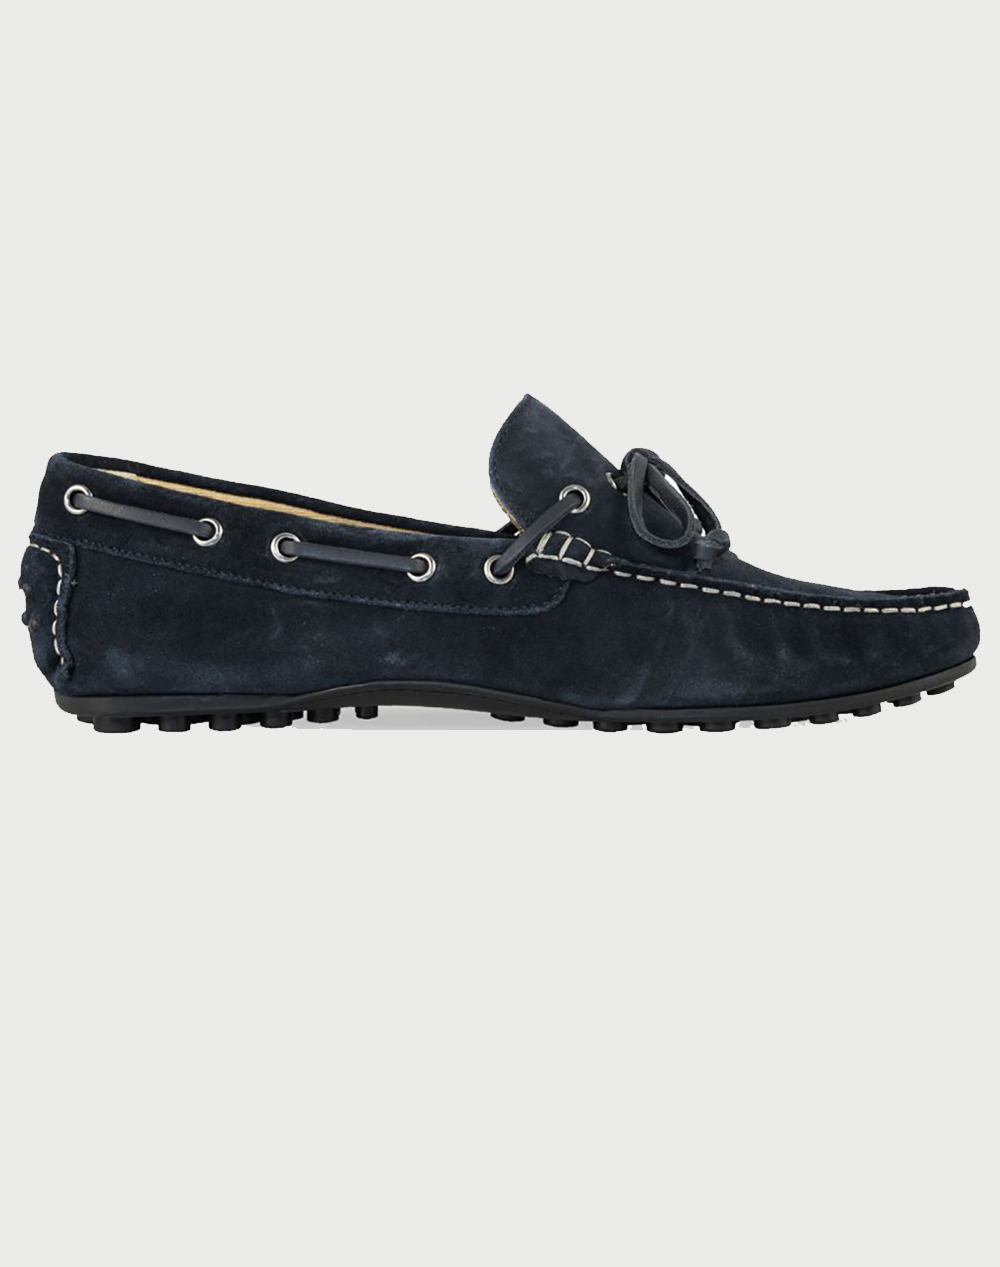 LUMBERJACK MAIN DRIVE MOCASSIN LACE UP SUEDE ΠΑΠΟΥΤΣΙ ΑΝΔΡΙΚΟ SM81802002A01-CC026 DarkBlue